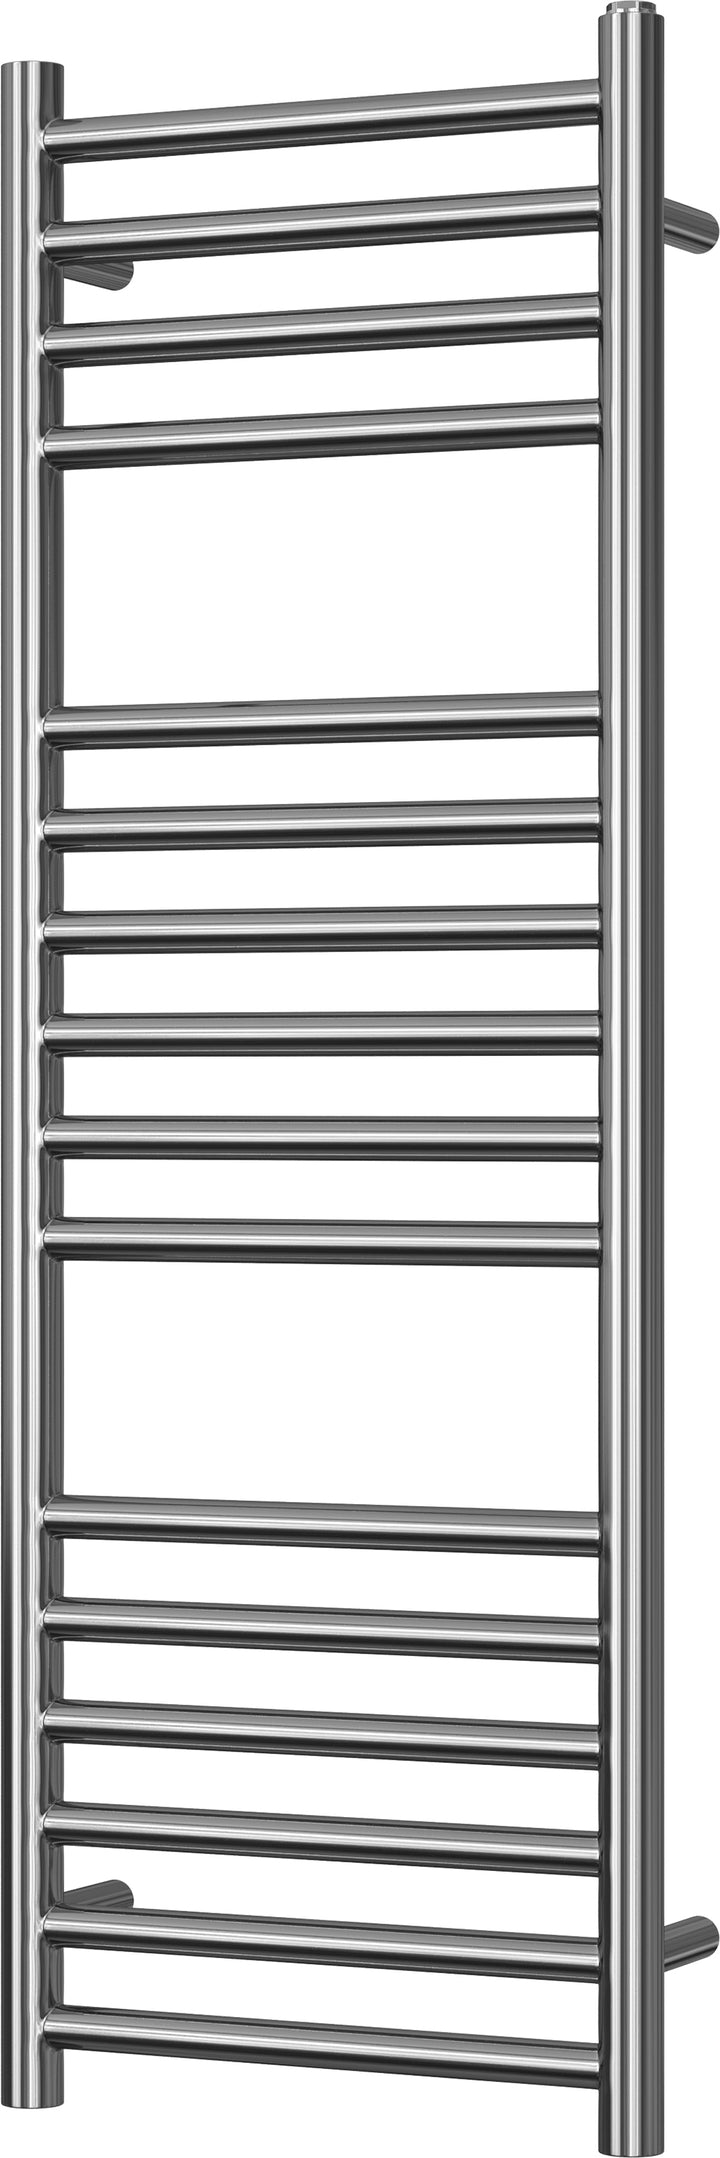 Aston - Stainless Steel Heated Towel Rail - H1000mm x W350mm - Straight